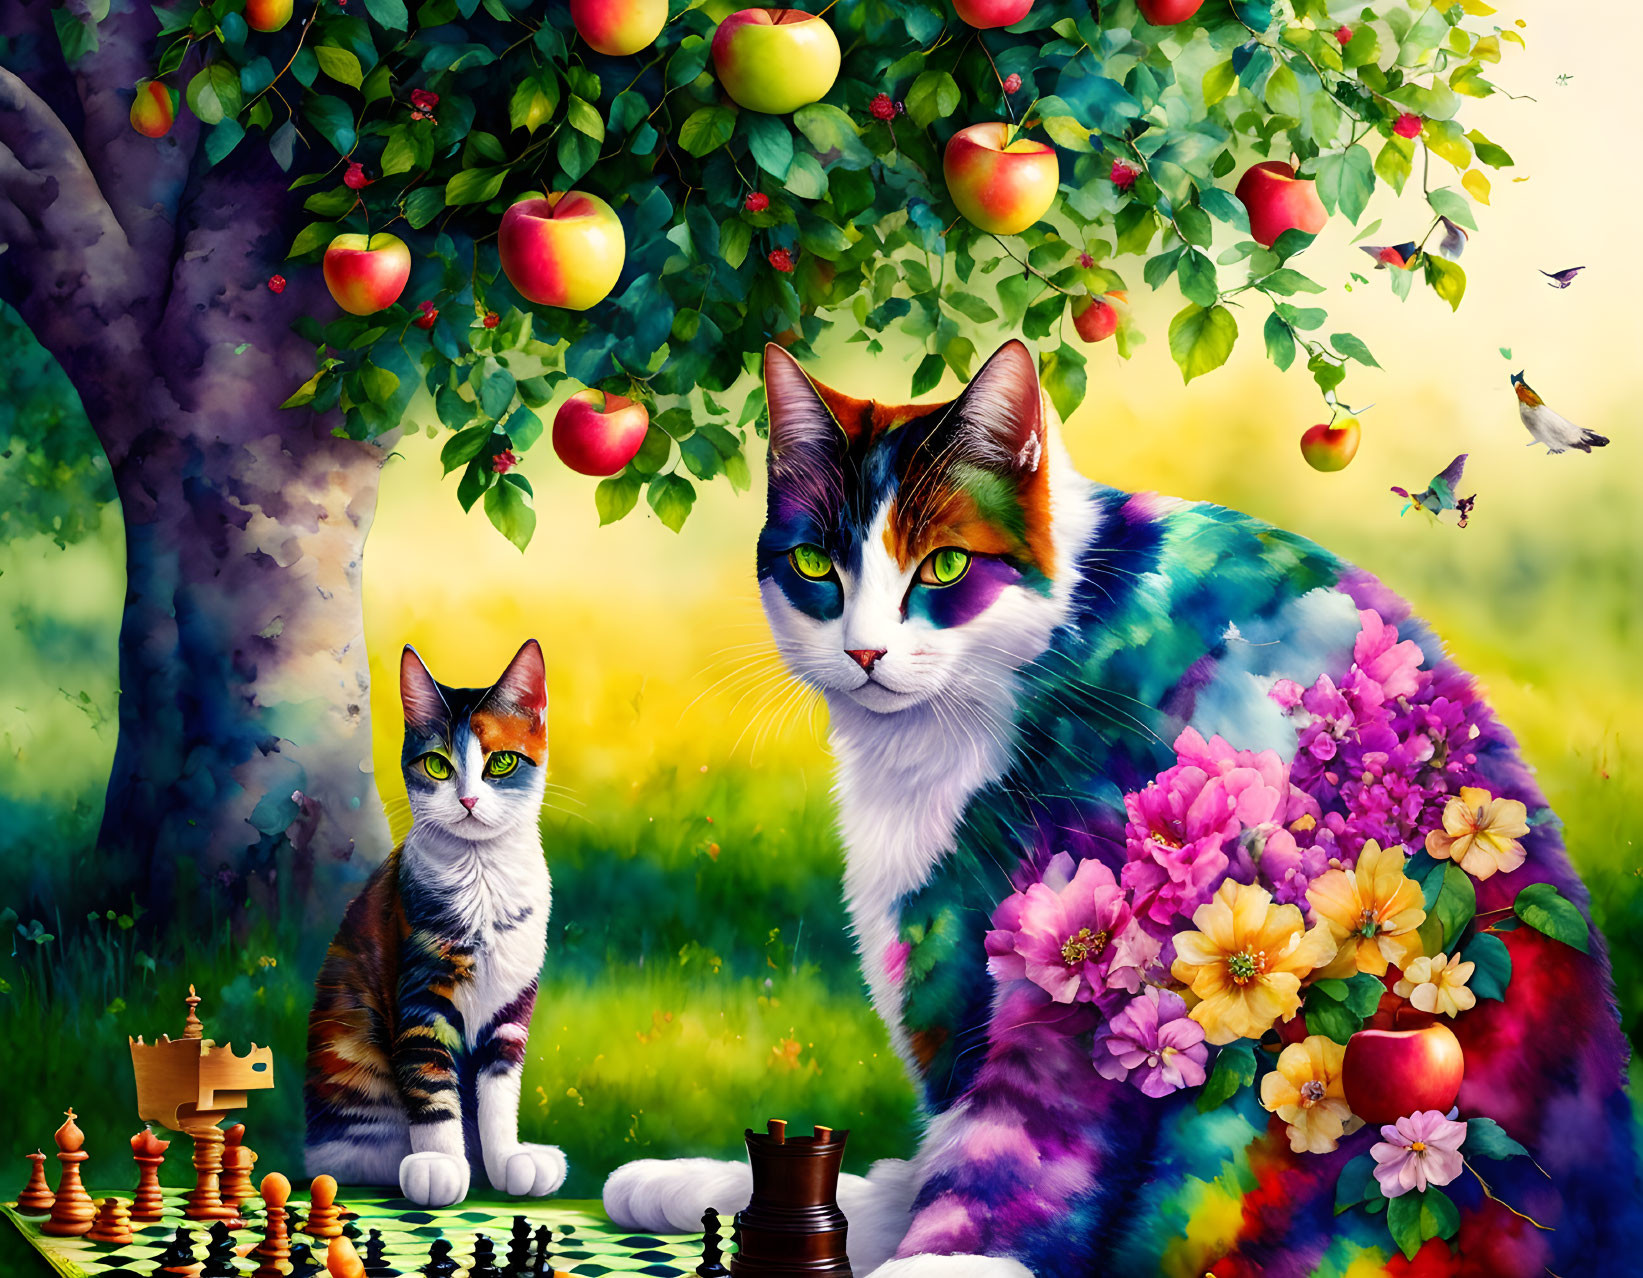 Colorful Cats and Chessboard in Lush Garden Setting